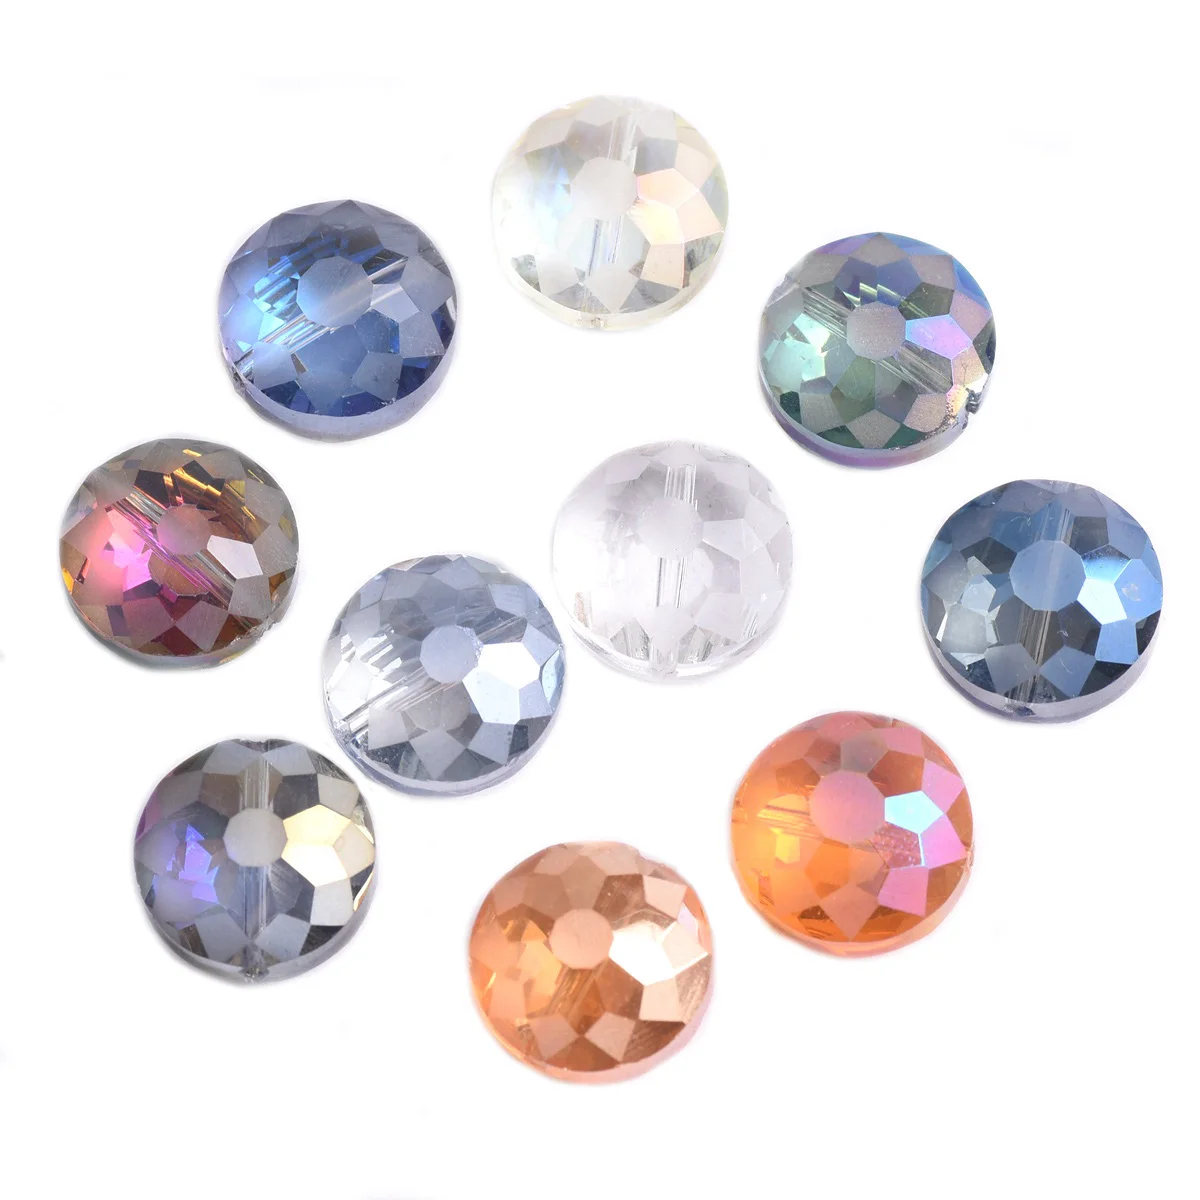 10pcs 14mm 18mm Rondelle Faceted Matte Crystal Glass Loose Beads for Jewelry Making DIY Crafts 5pcs transparent 27mm austrian element peach heart pendant sun catcher crystal chandelier decor faceted glass prism love beads